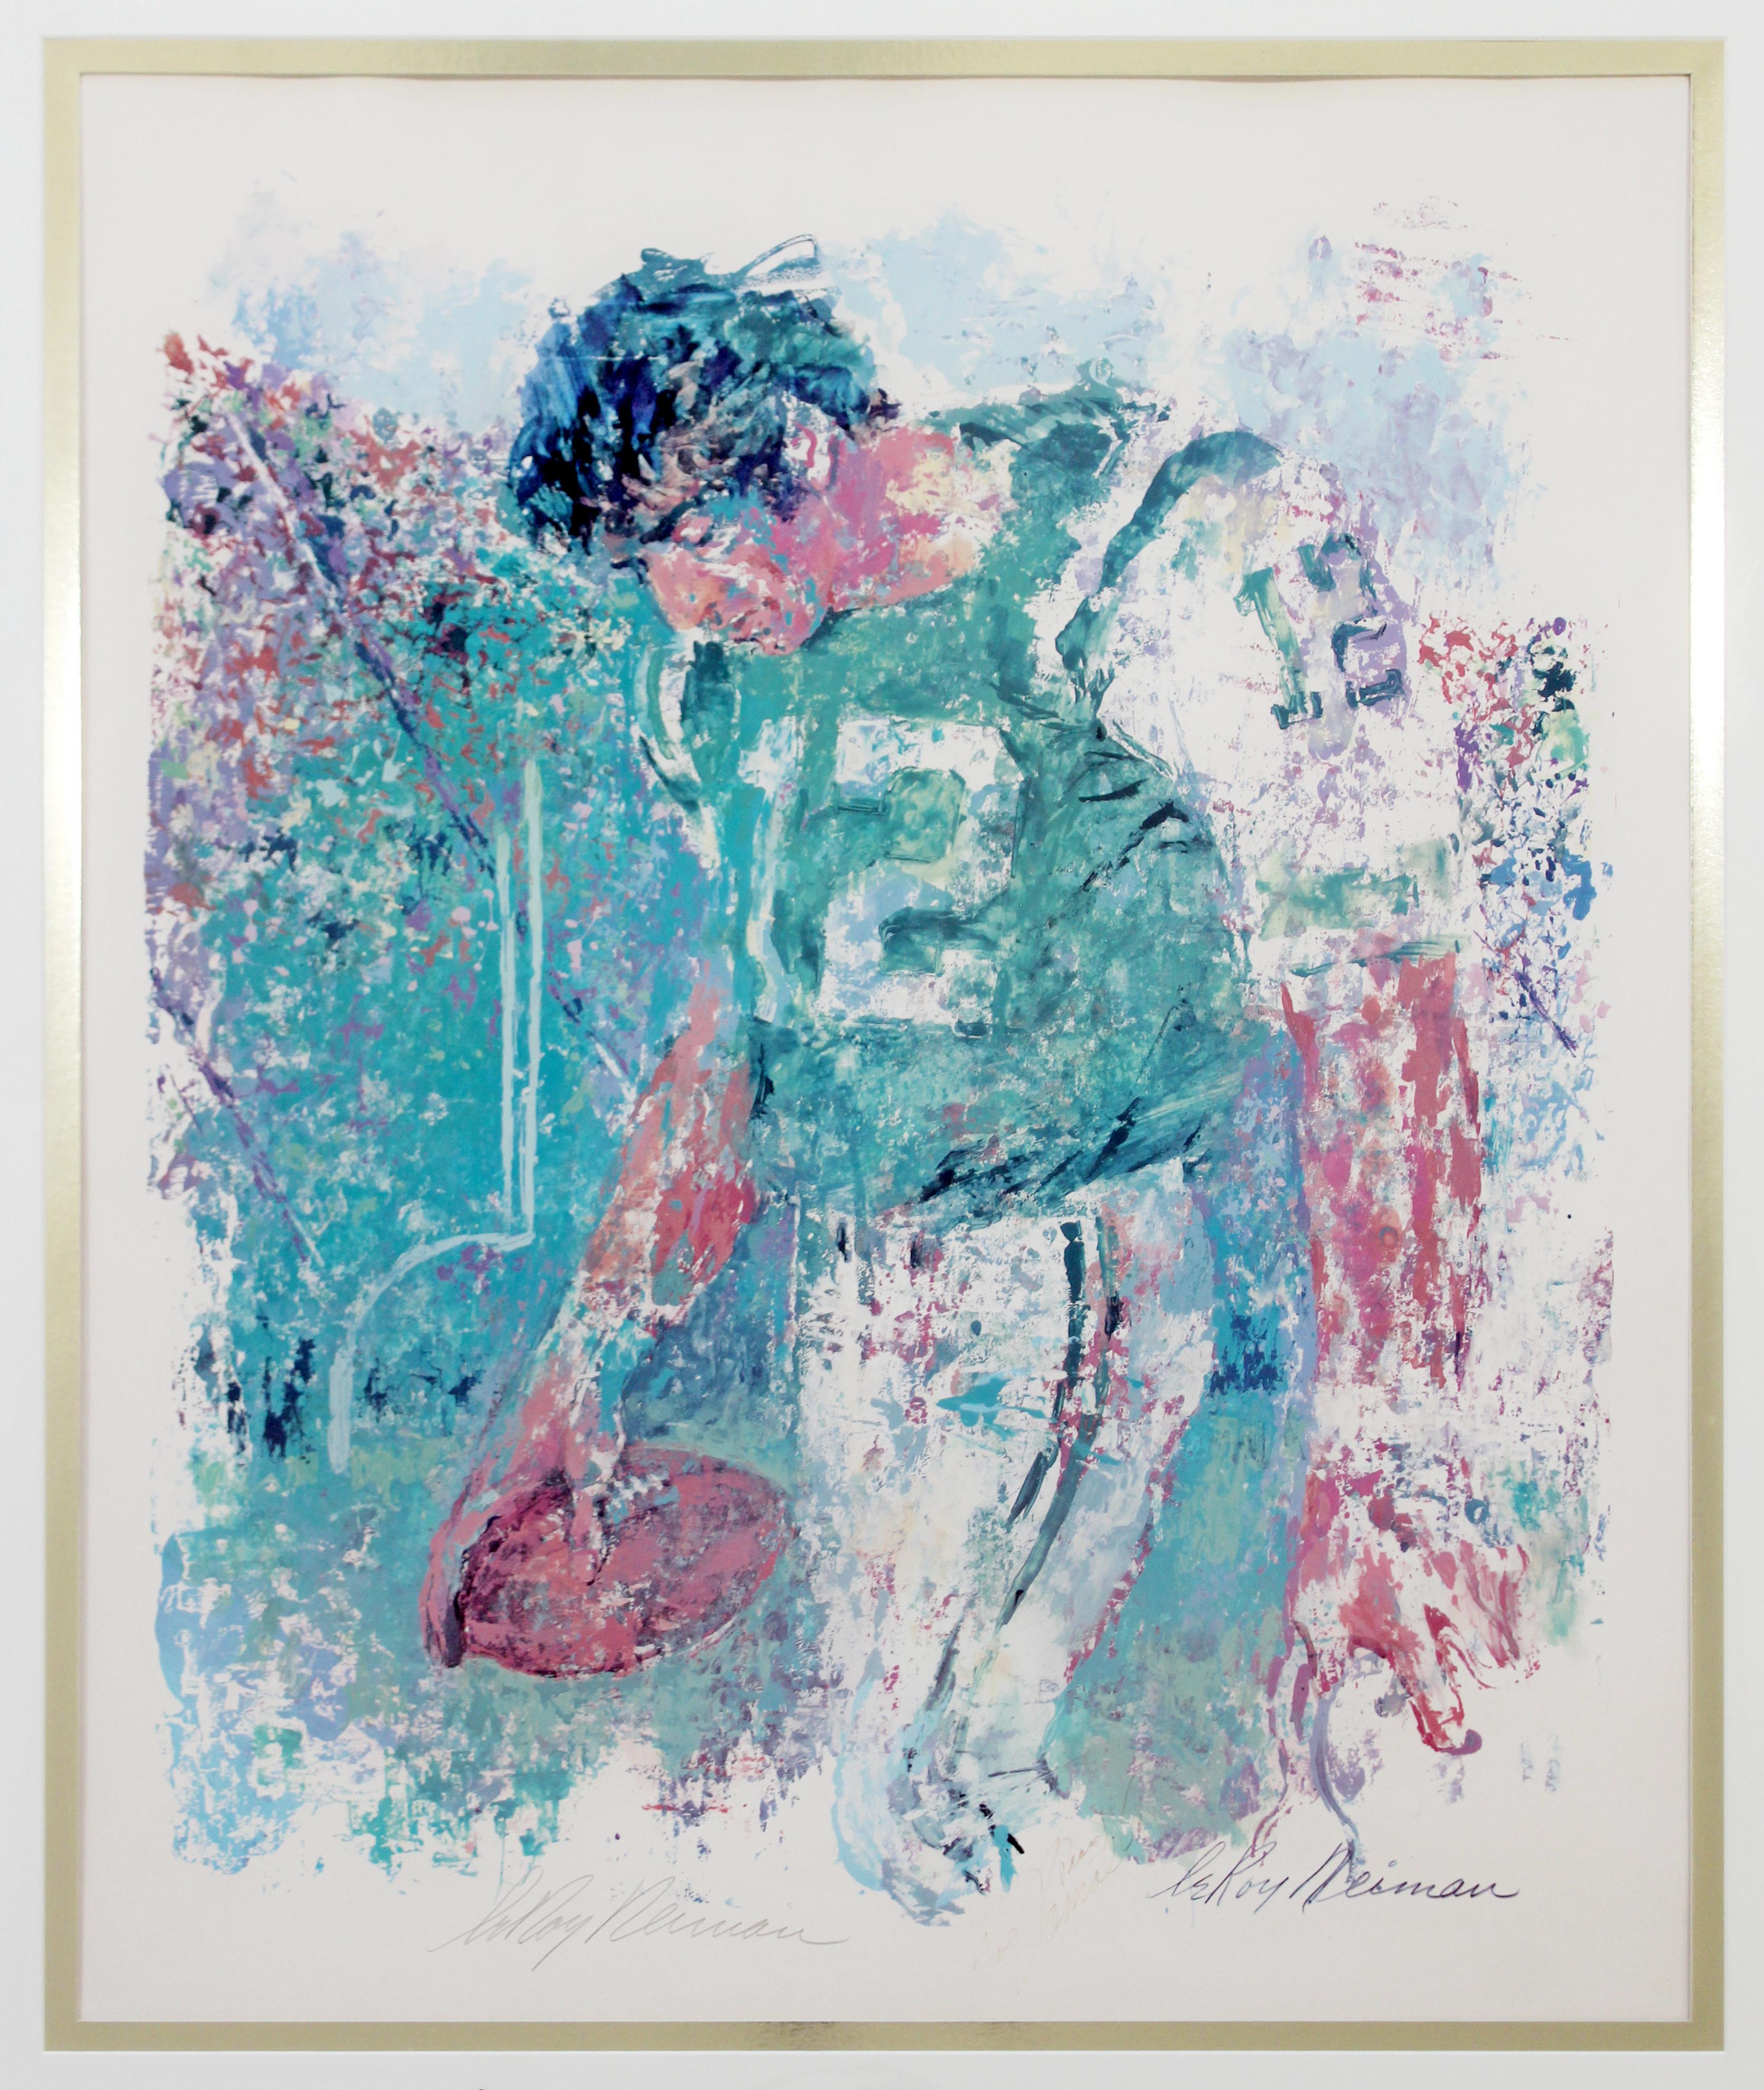 For your consideration is a magnificent, framed lithograph of Joe Namath, Dual signed by Leroy Neiman and Joe Namath. In excellent condition. The dimensions of the frame are 31